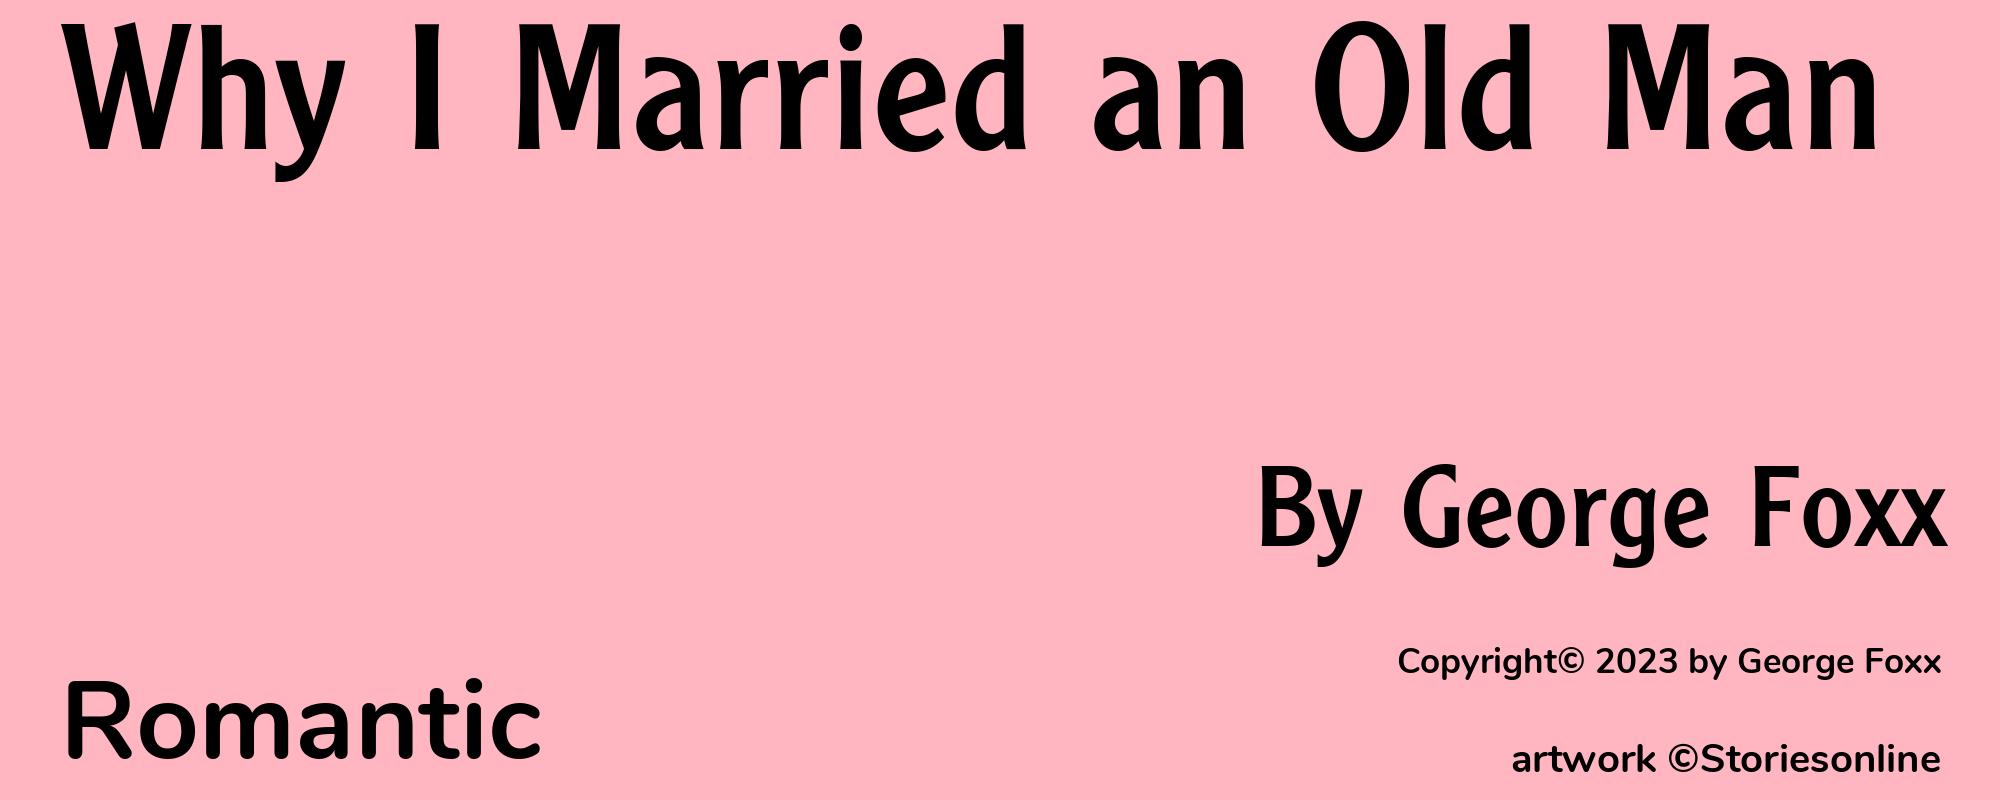 Why I Married an Old Man - Cover